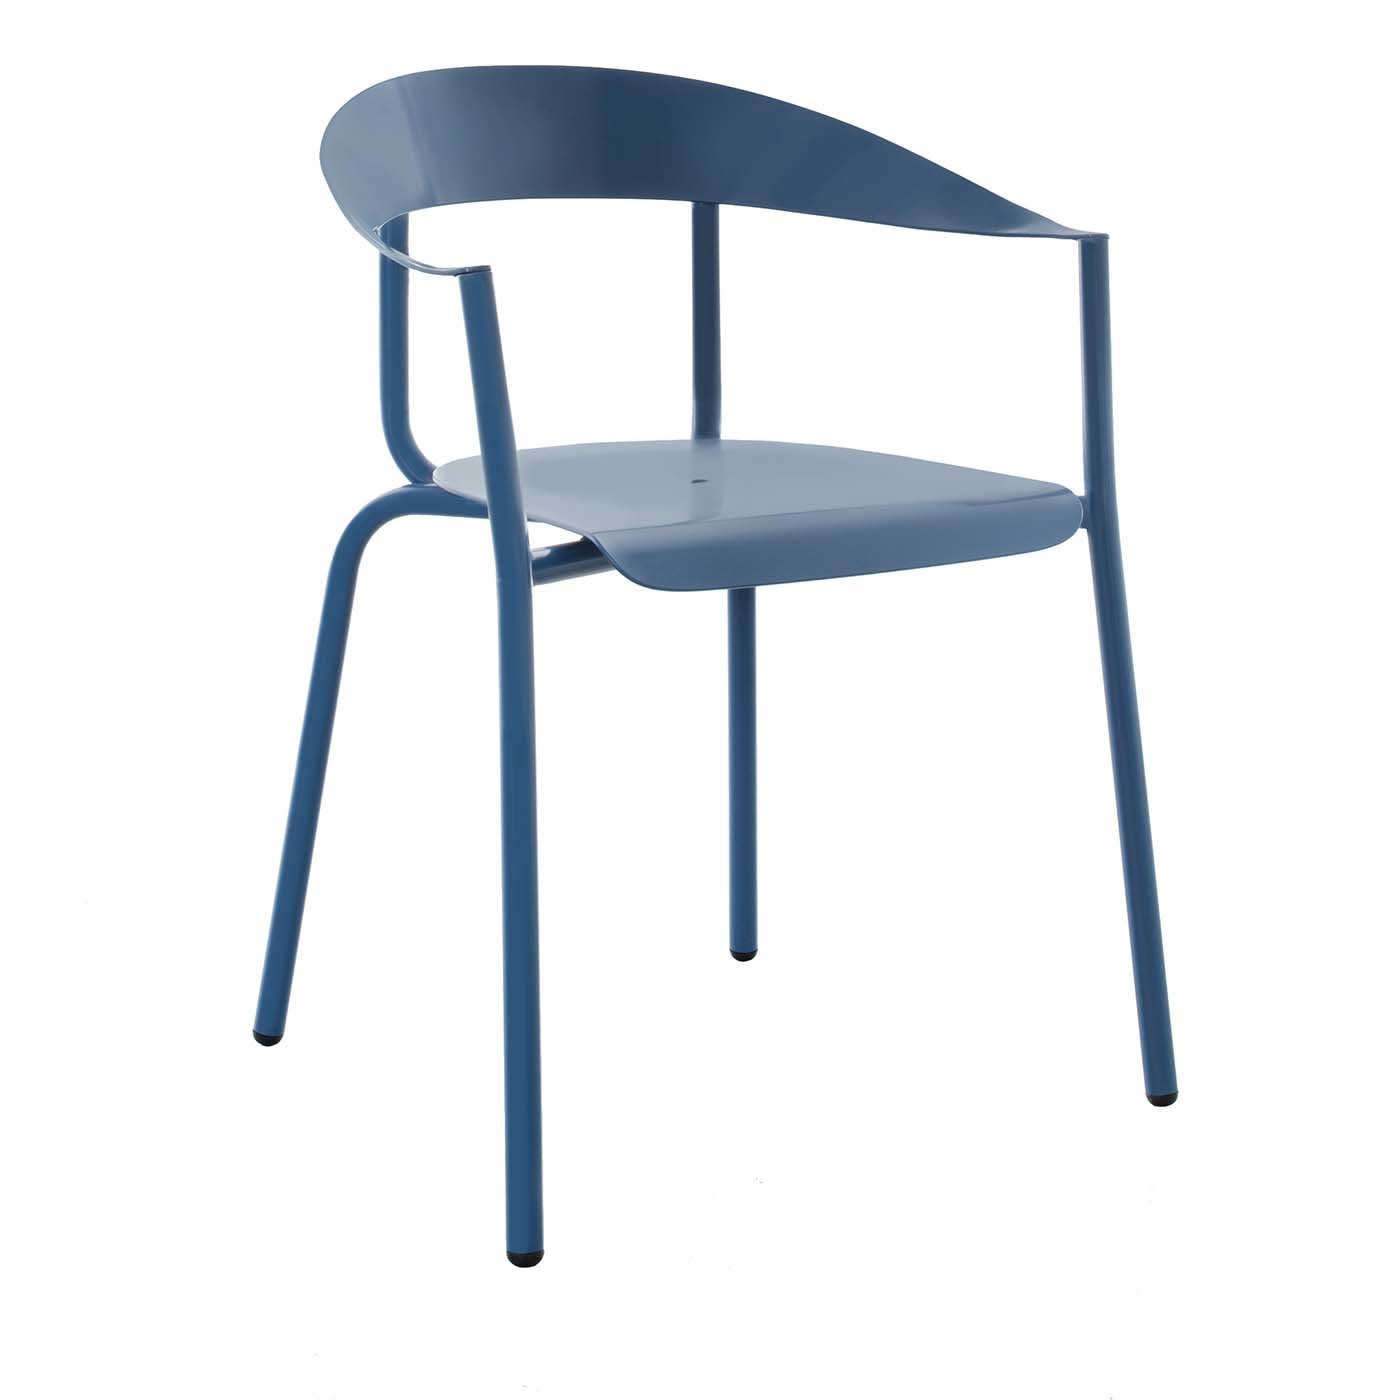 Blue AluMito Chair with Armrests by Pascal Bosetti - Altek Italia Design